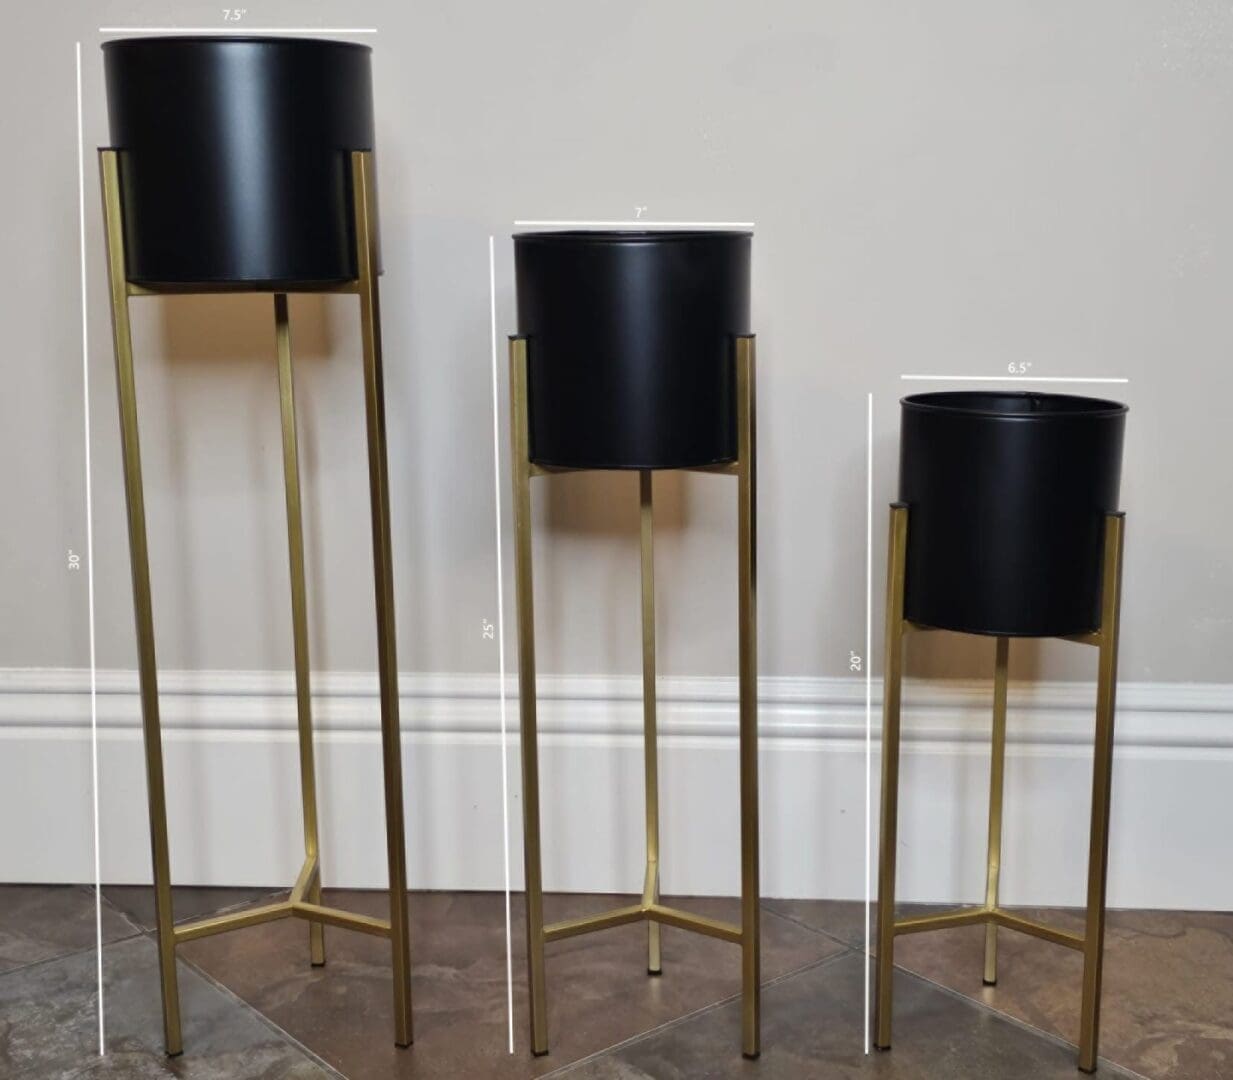 Three tall black planters on stands in a room.